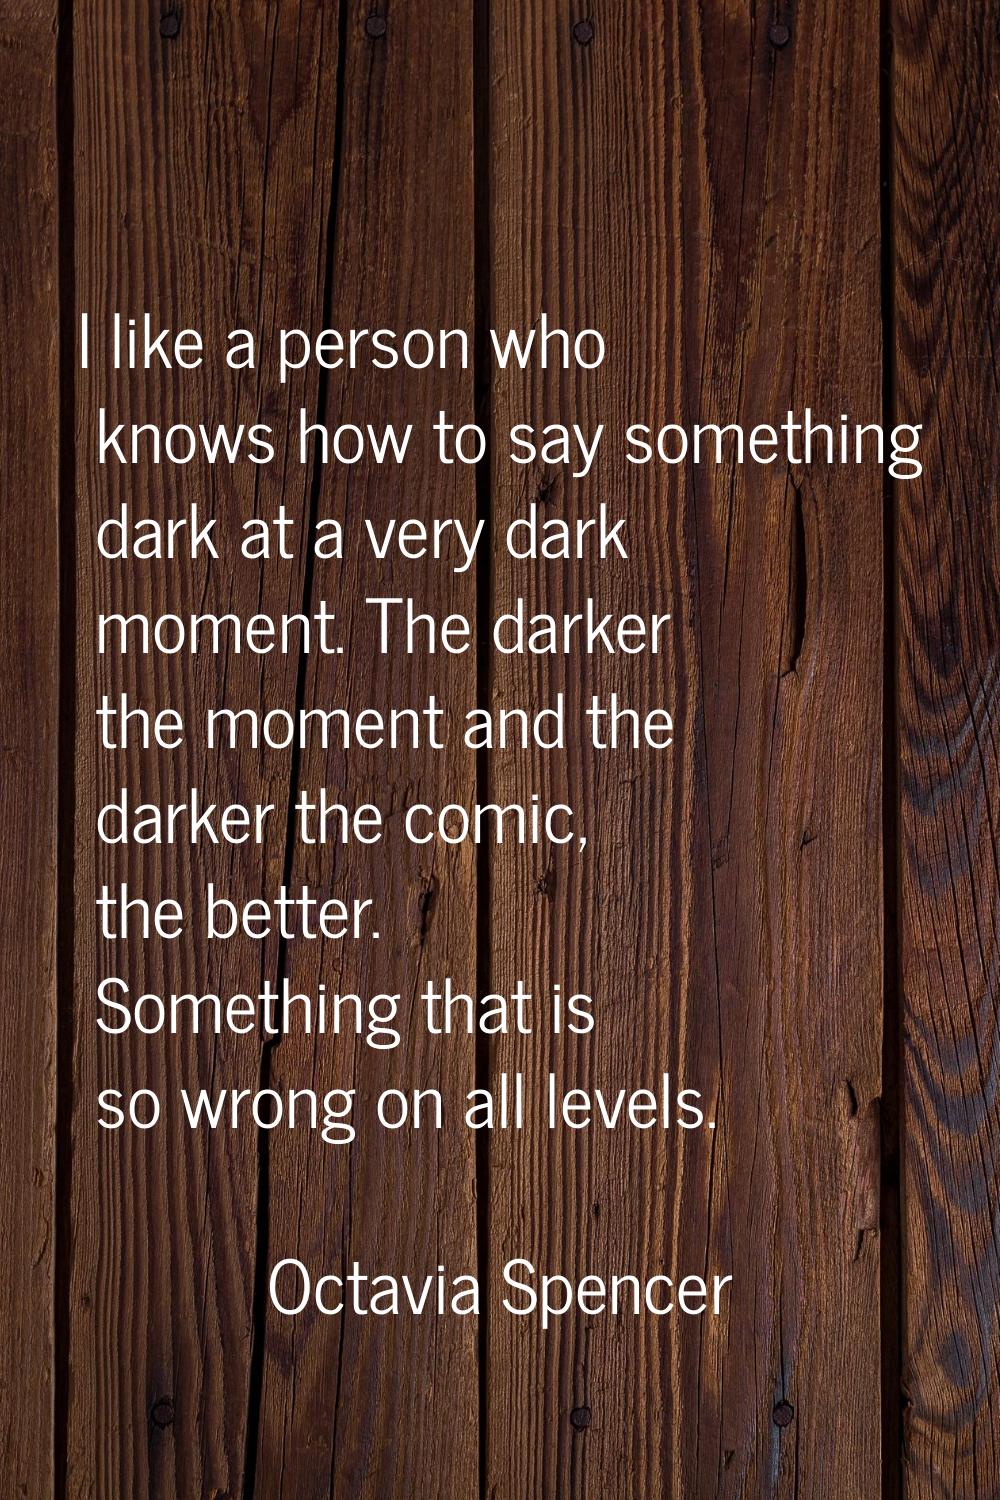 I like a person who knows how to say something dark at a very dark moment. The darker the moment an